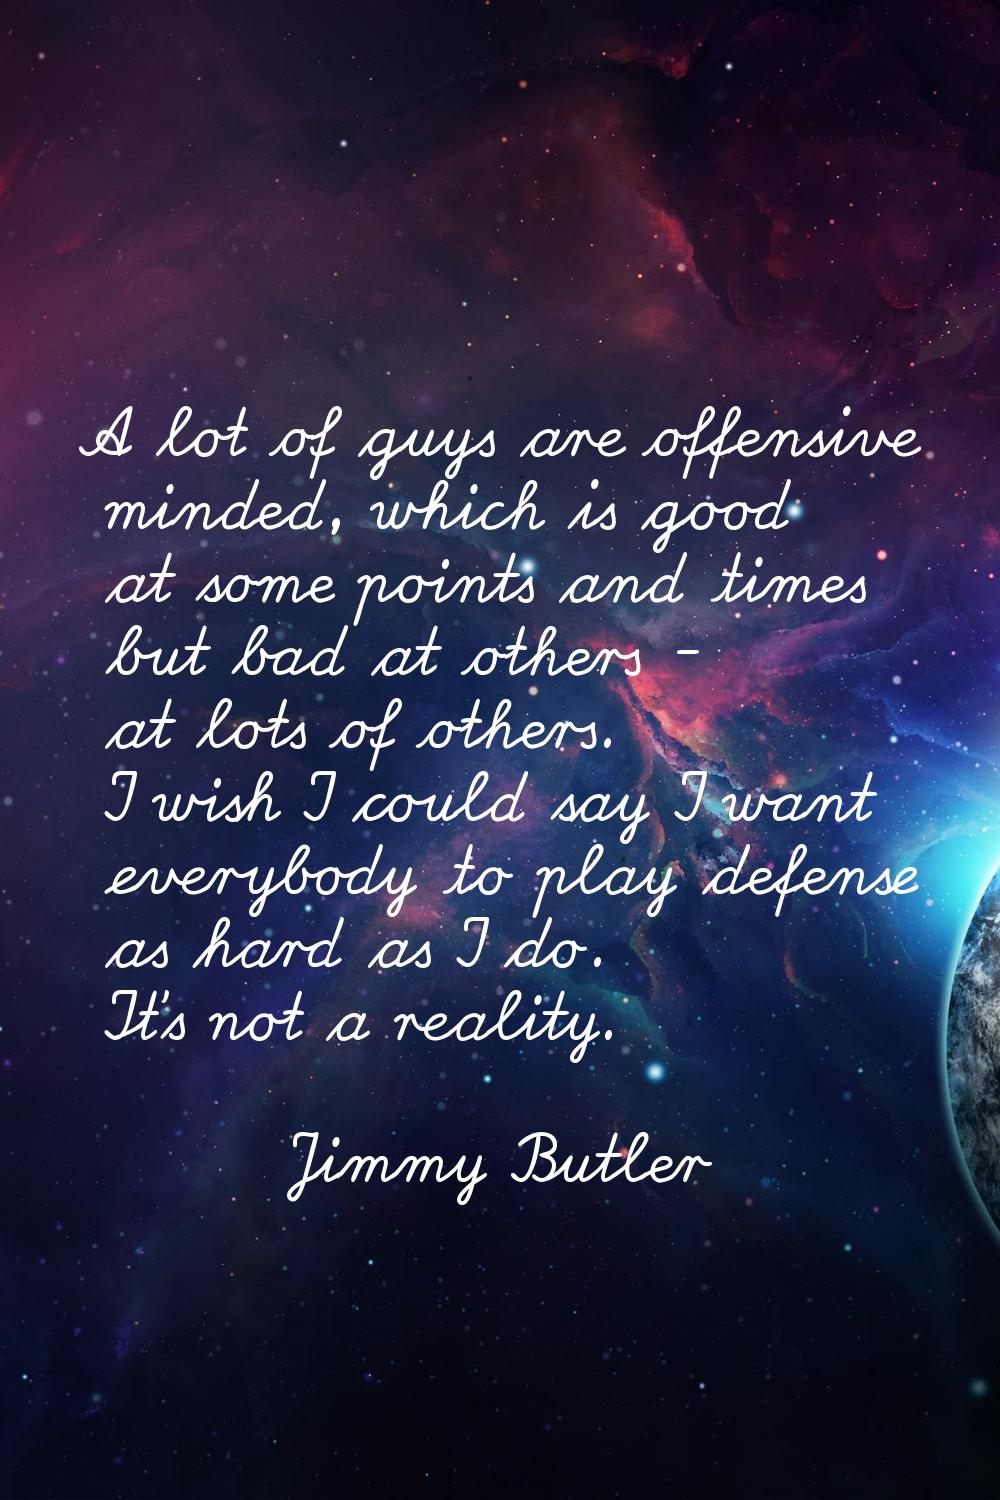 A lot of guys are offensive minded, which is good at some points and times but bad at others - at l